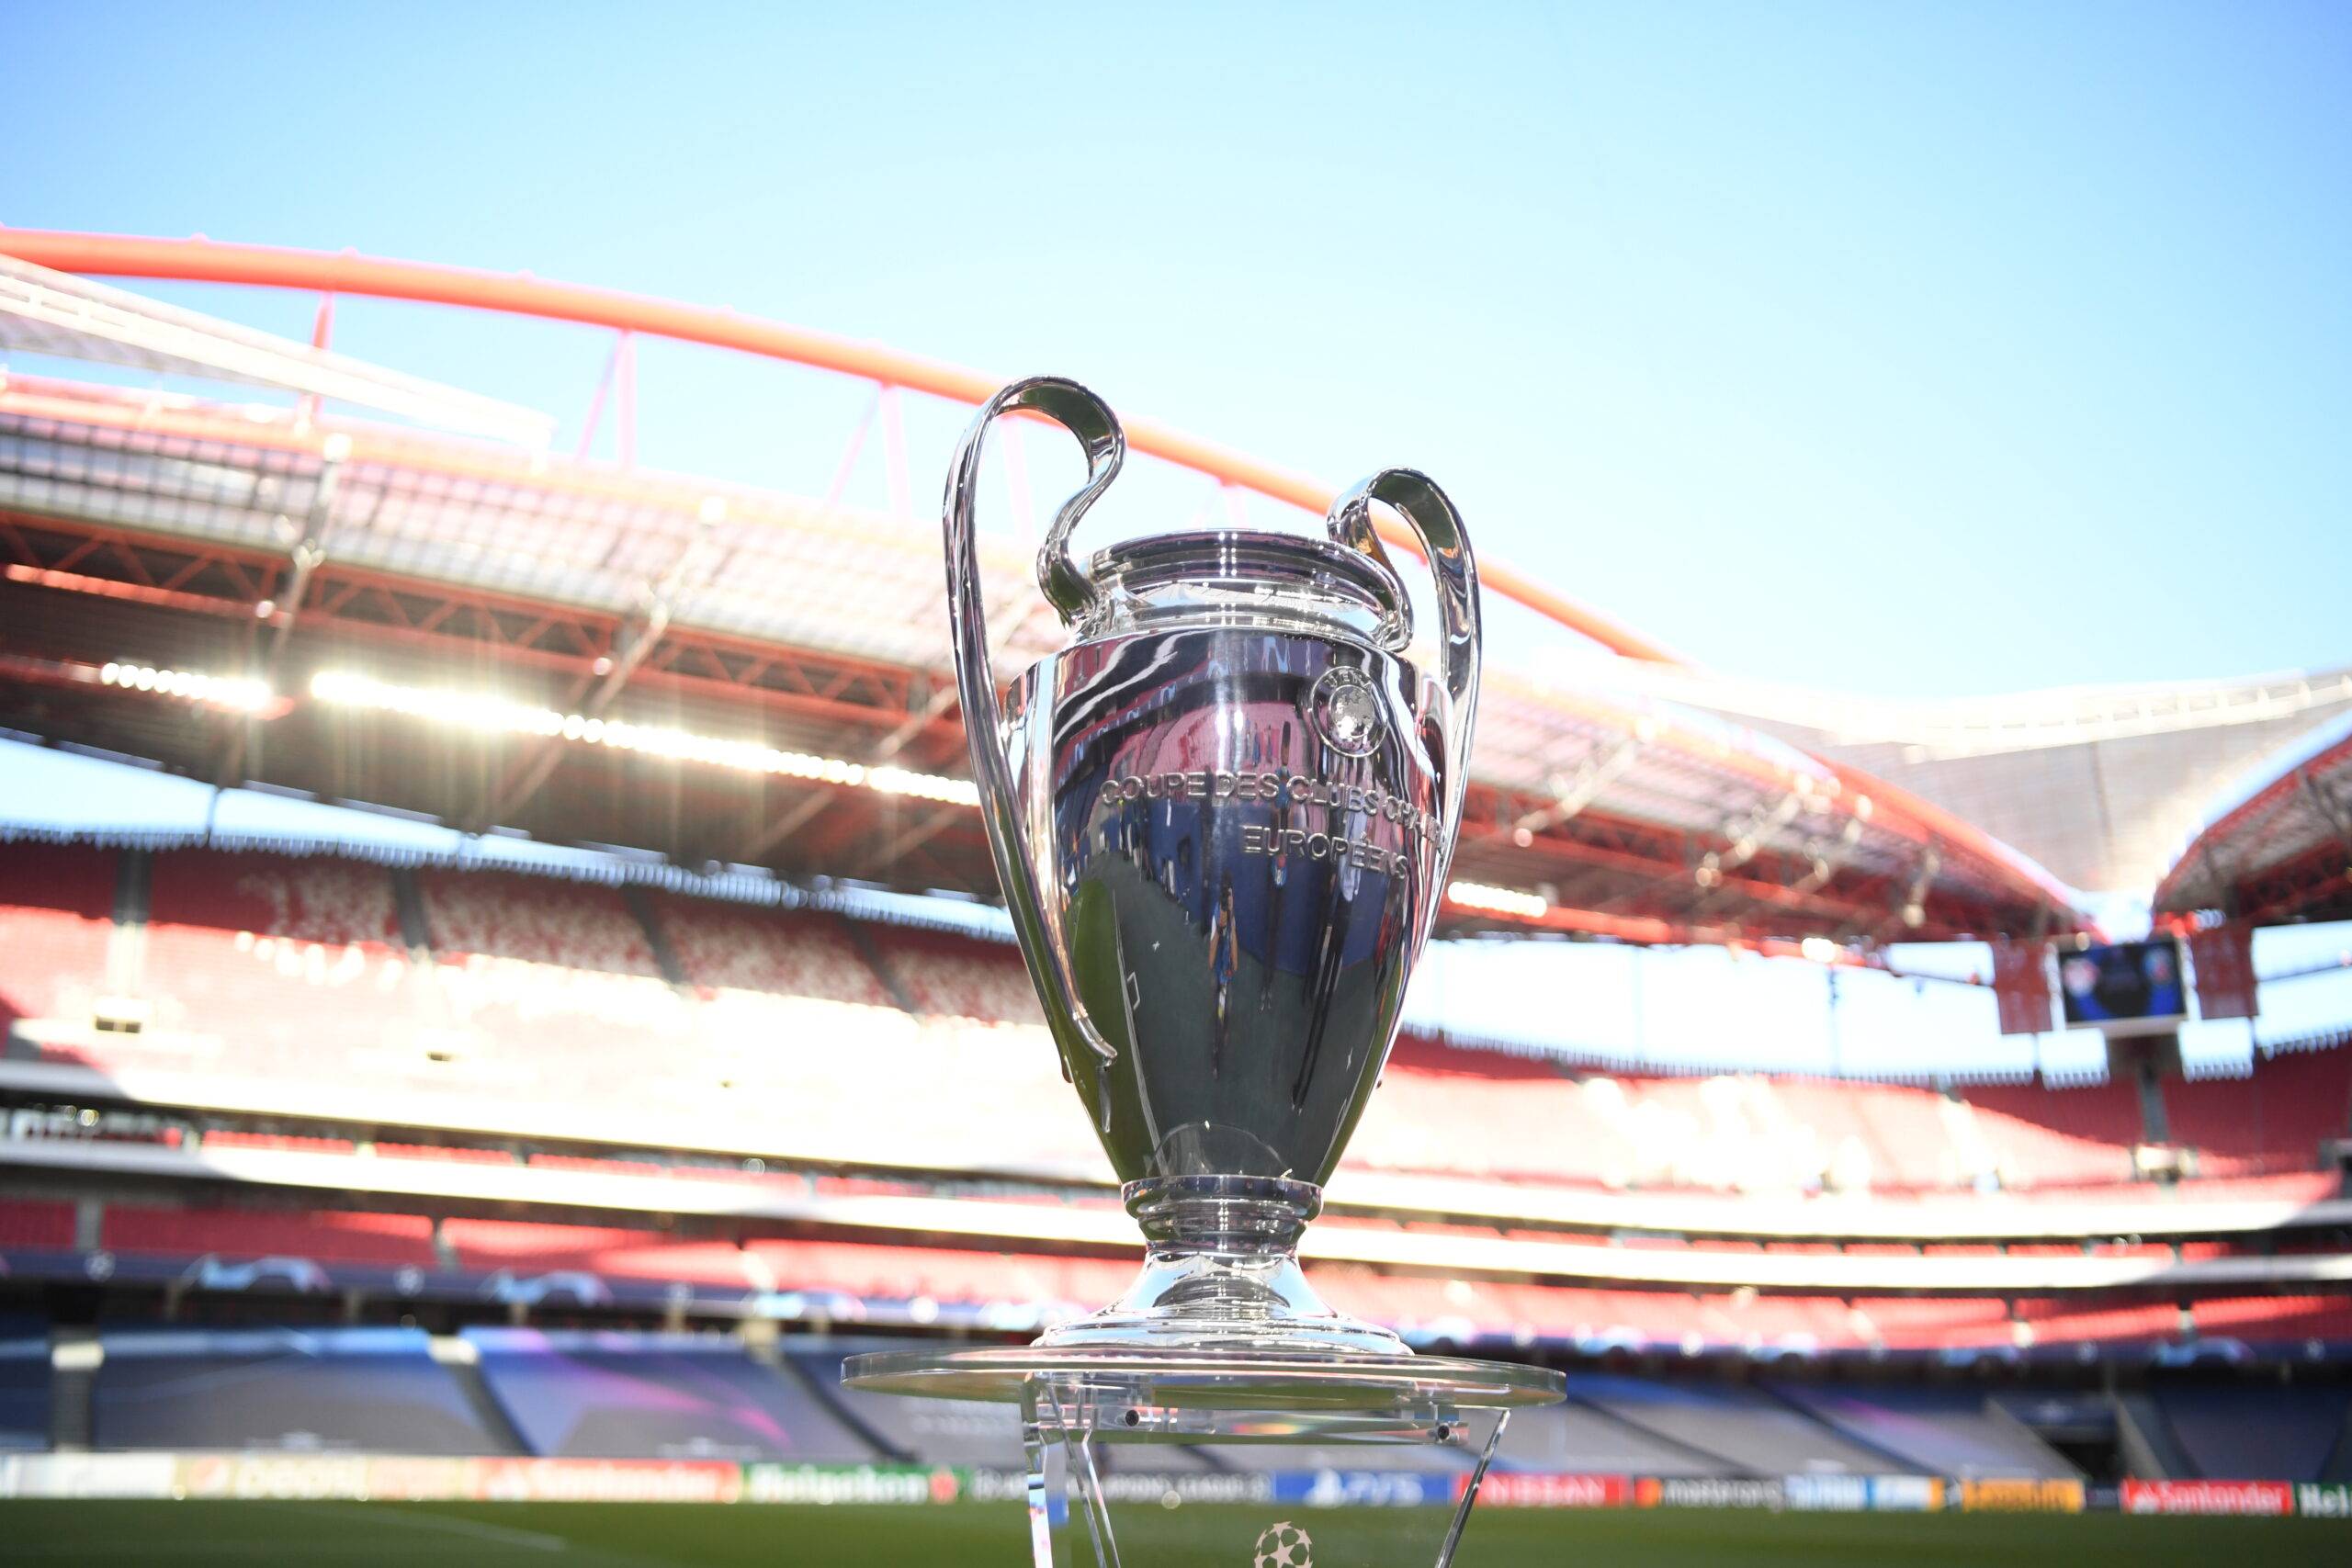 LISBON, PORTUGAL - AUGUST 18: The UEFA Champions League Trophy is seen pitch side prior to the UEFA Champions League